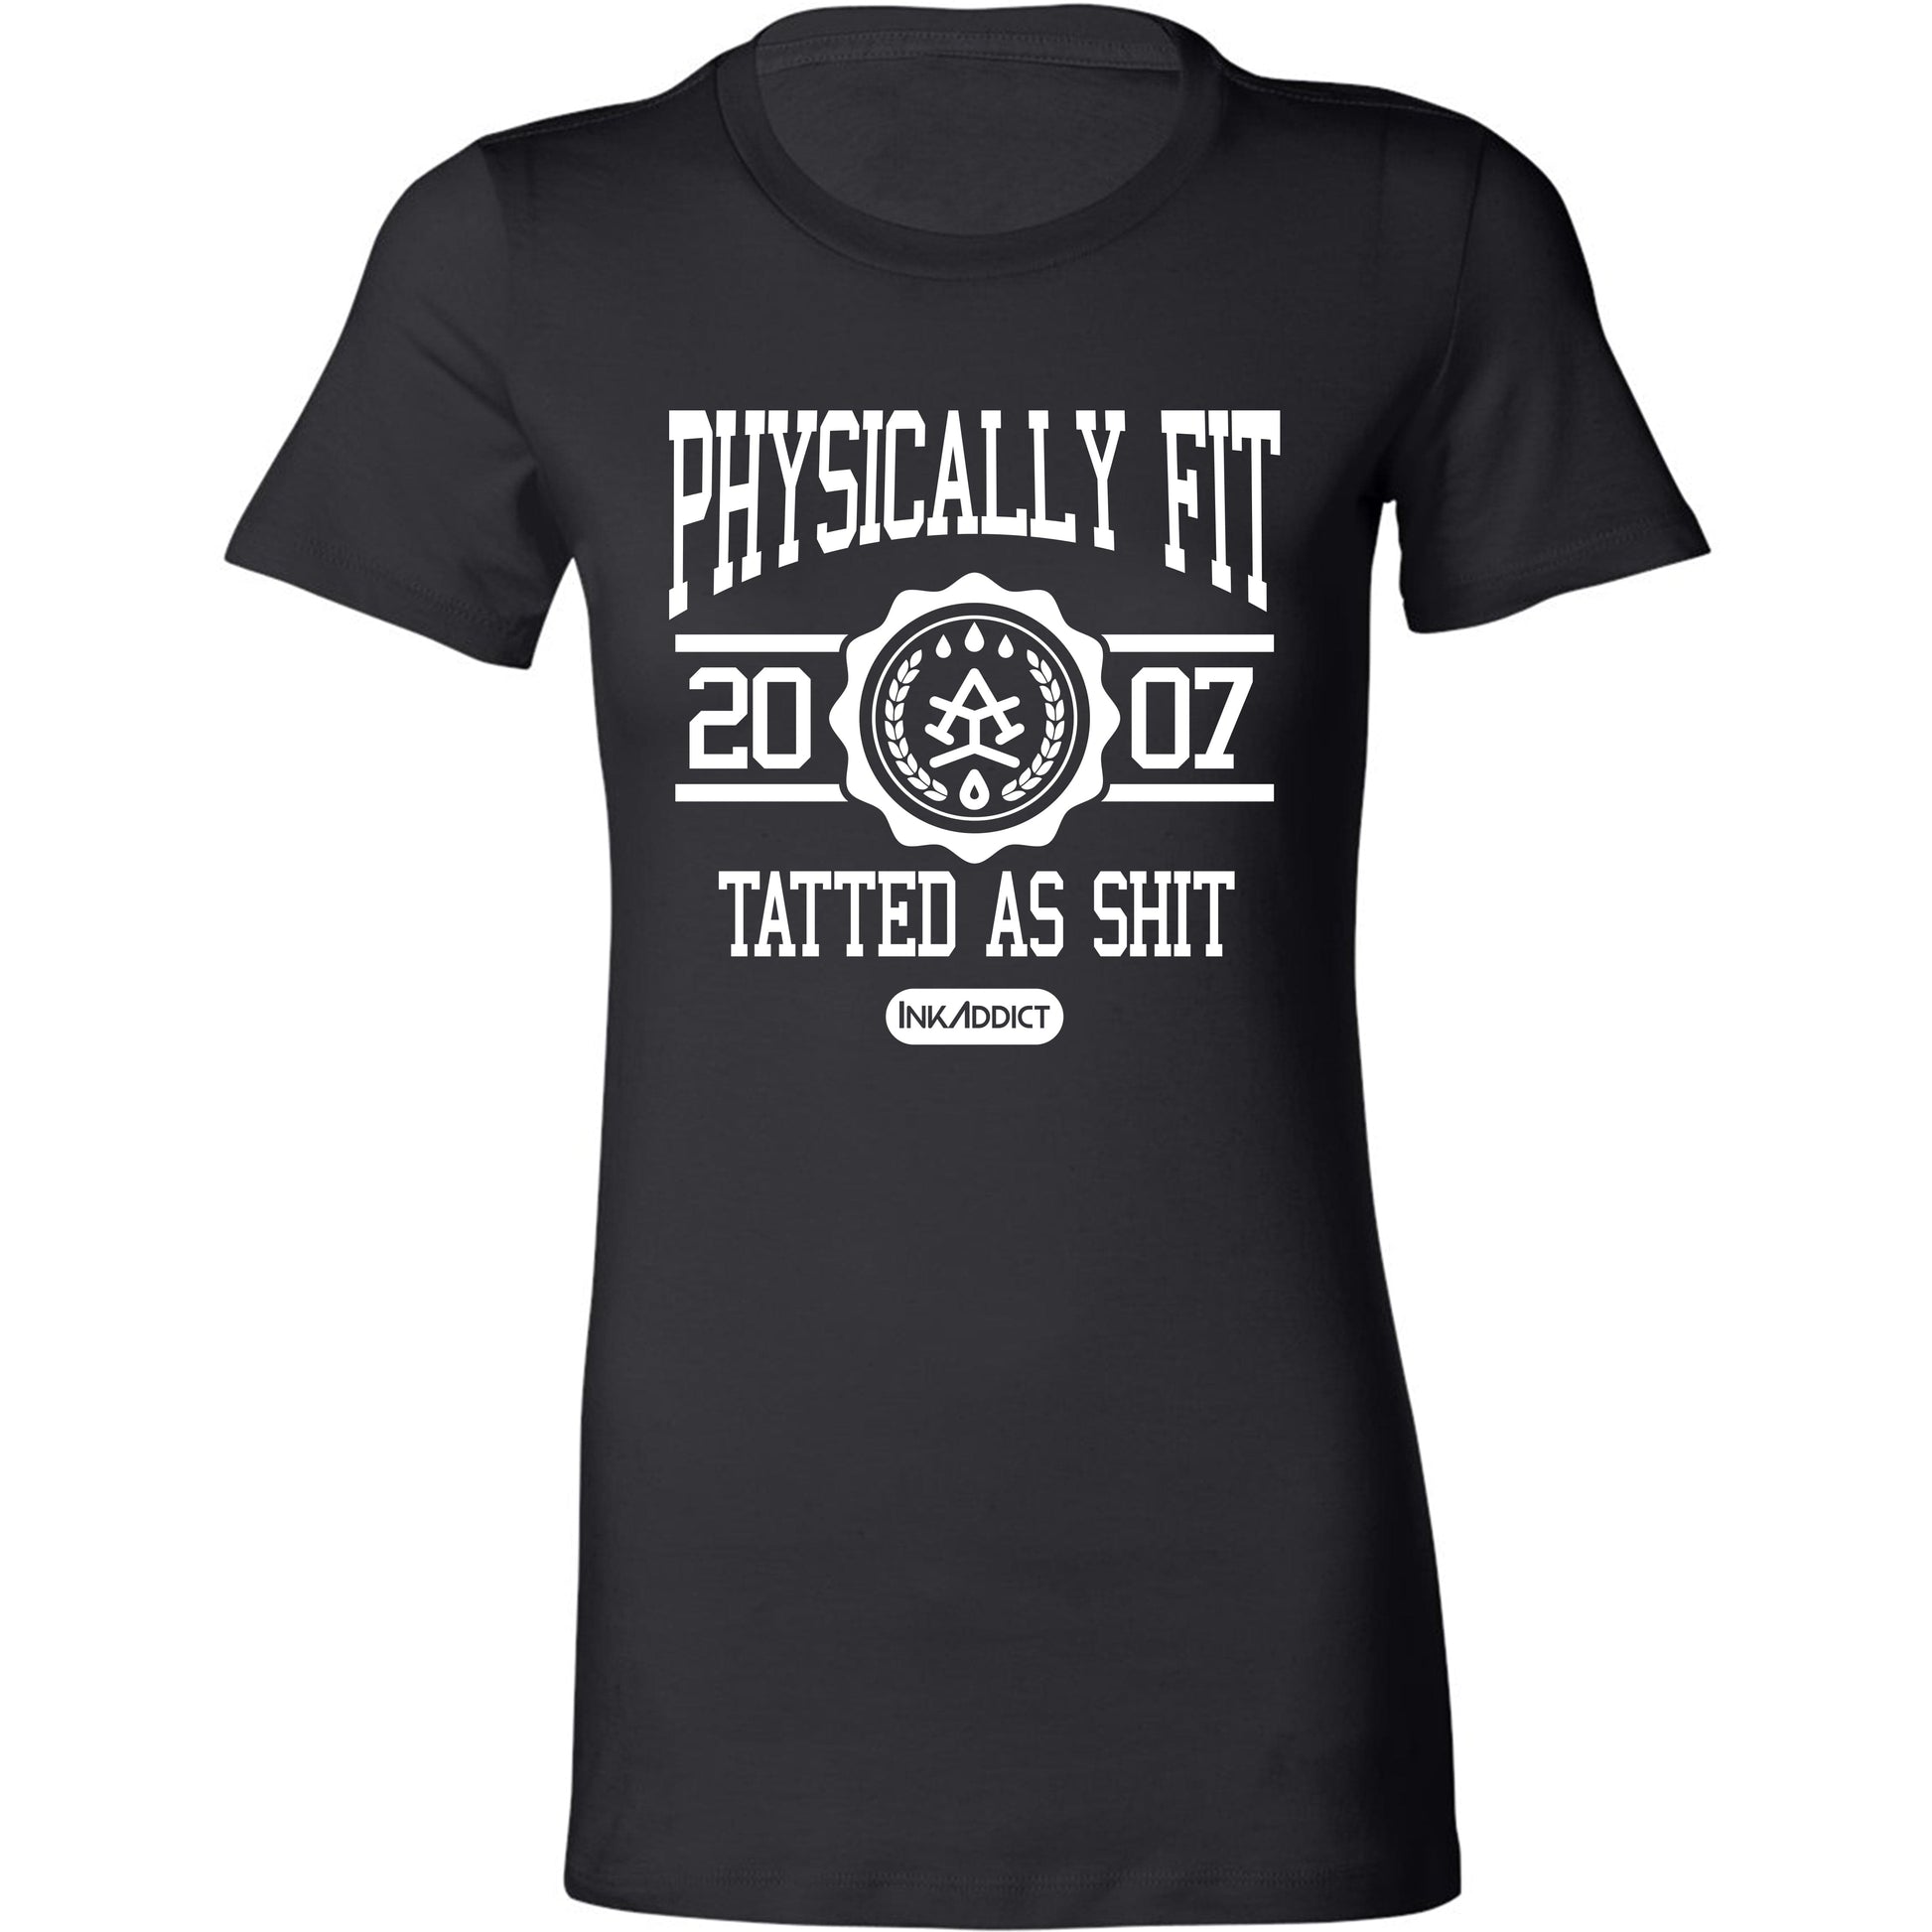 Physically Fit Collegiate Women's Slim Fit Tee